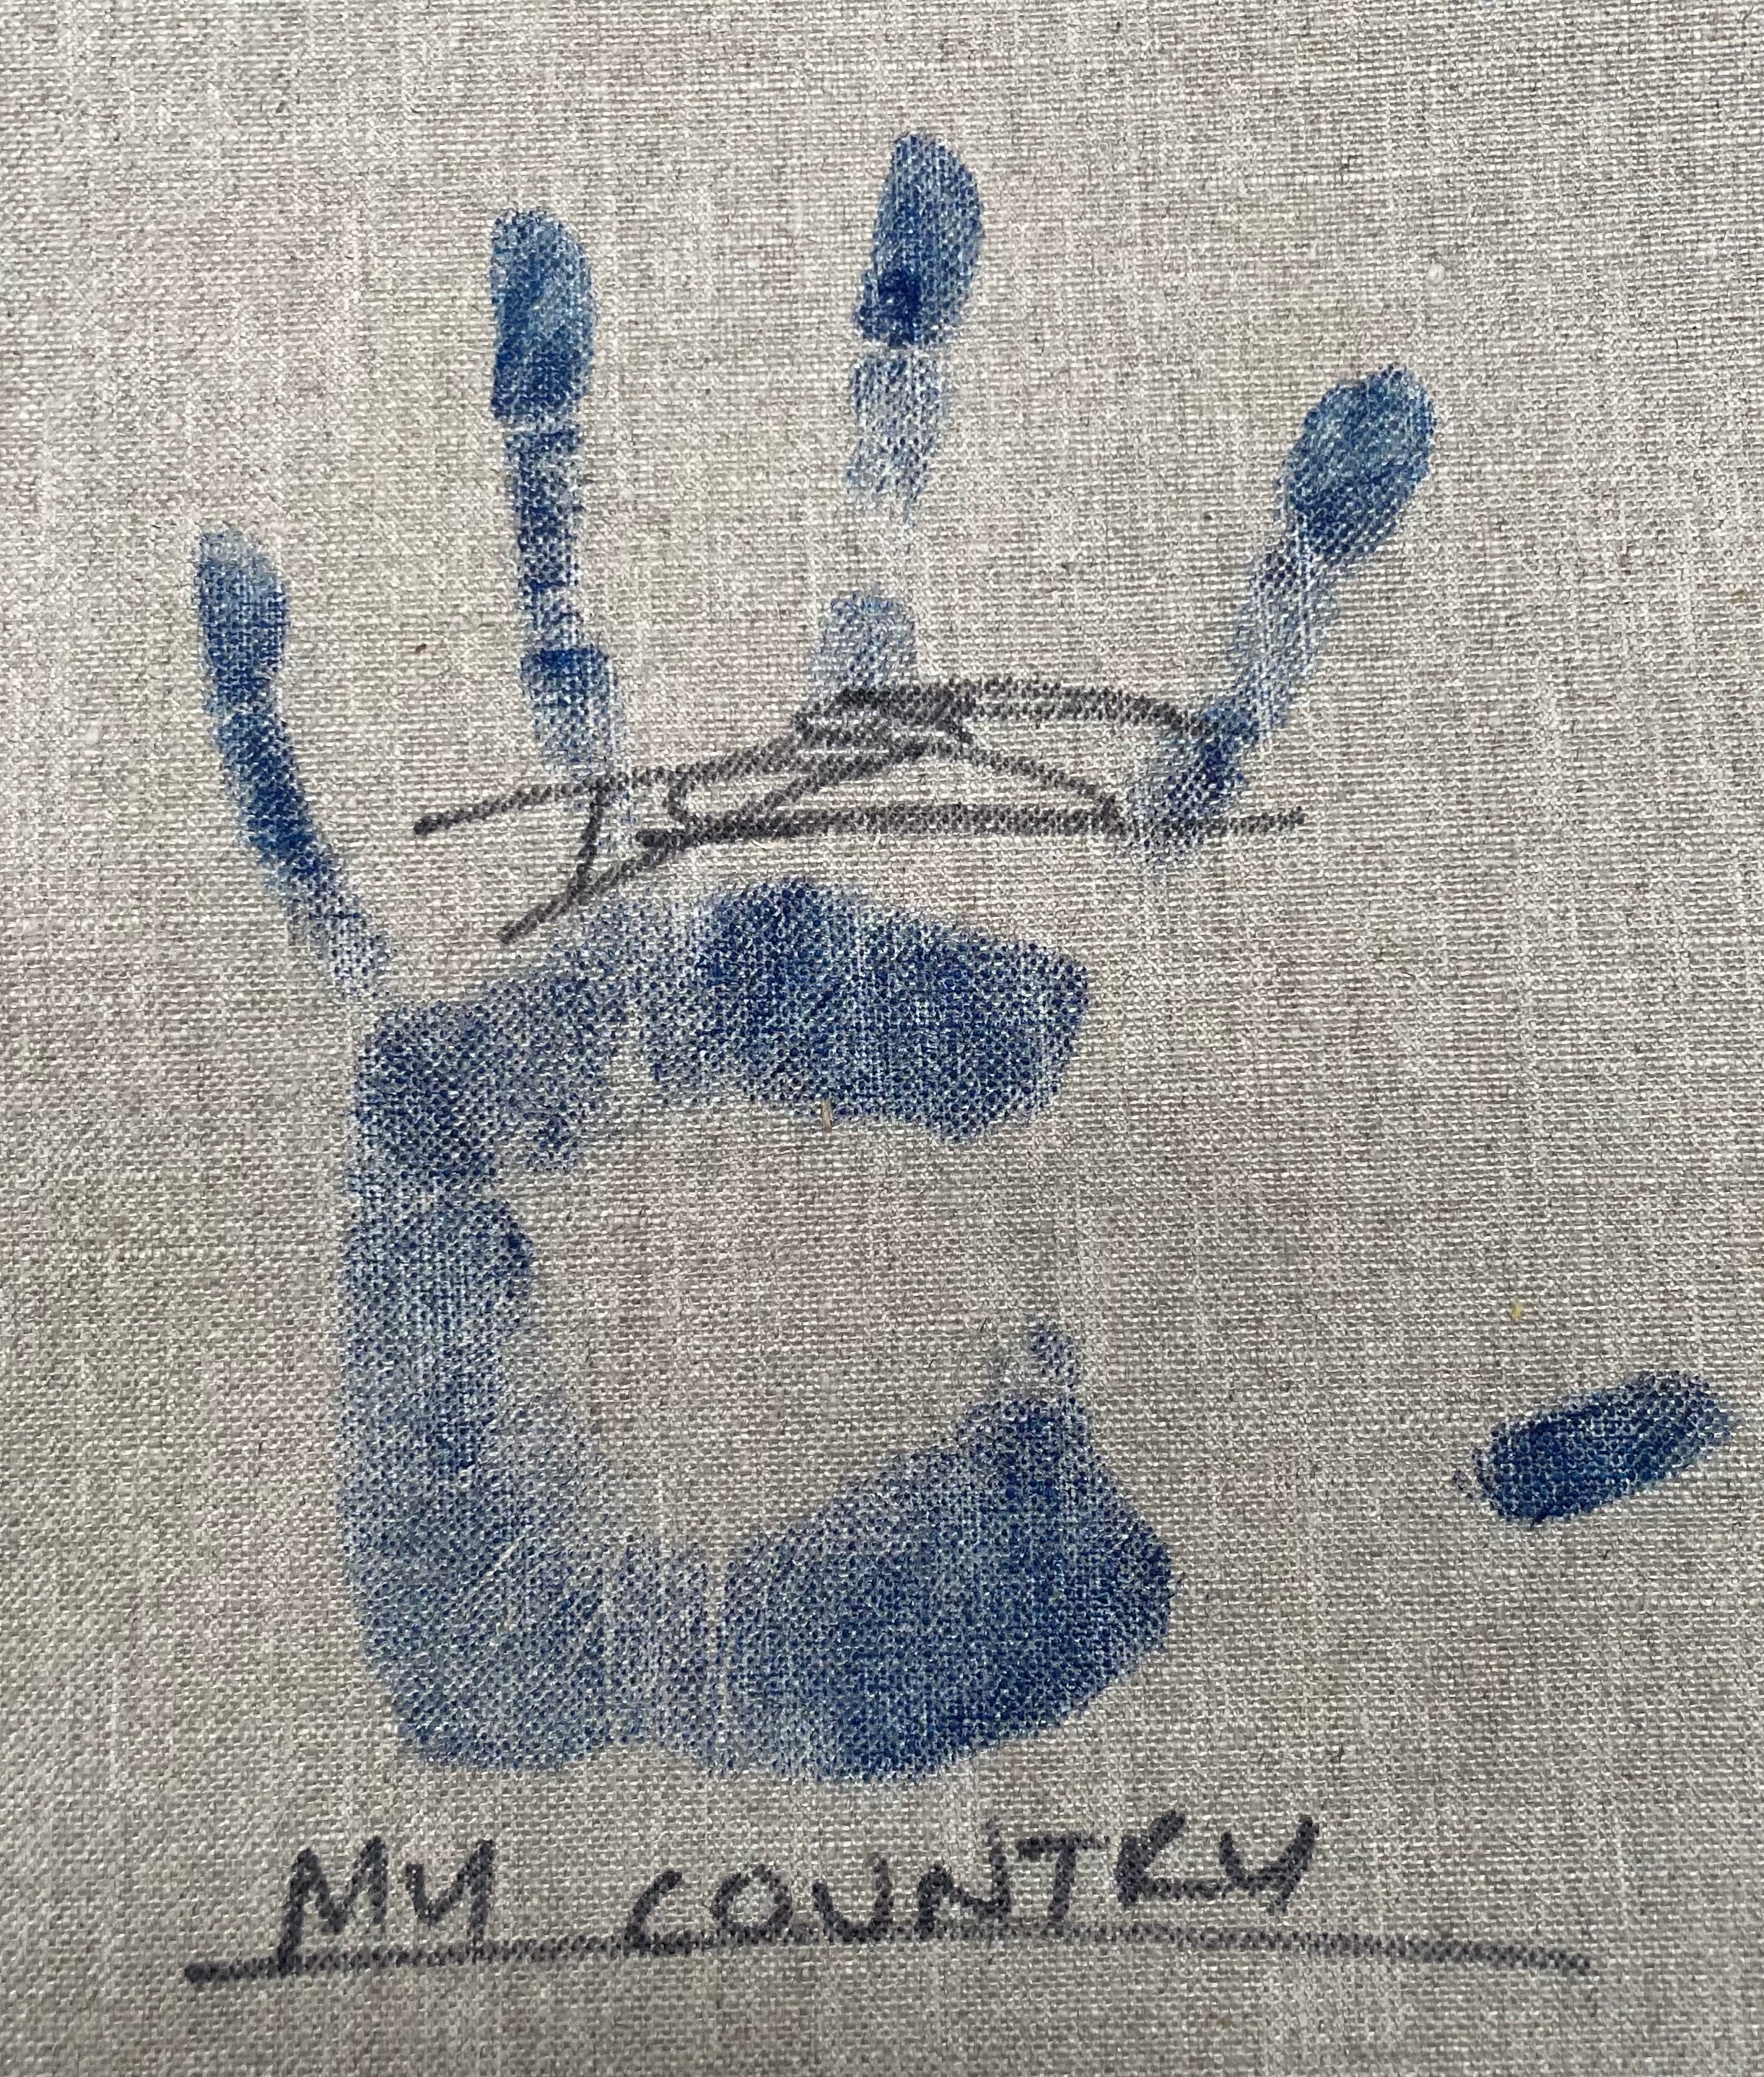 'My Country' | 30x31cm